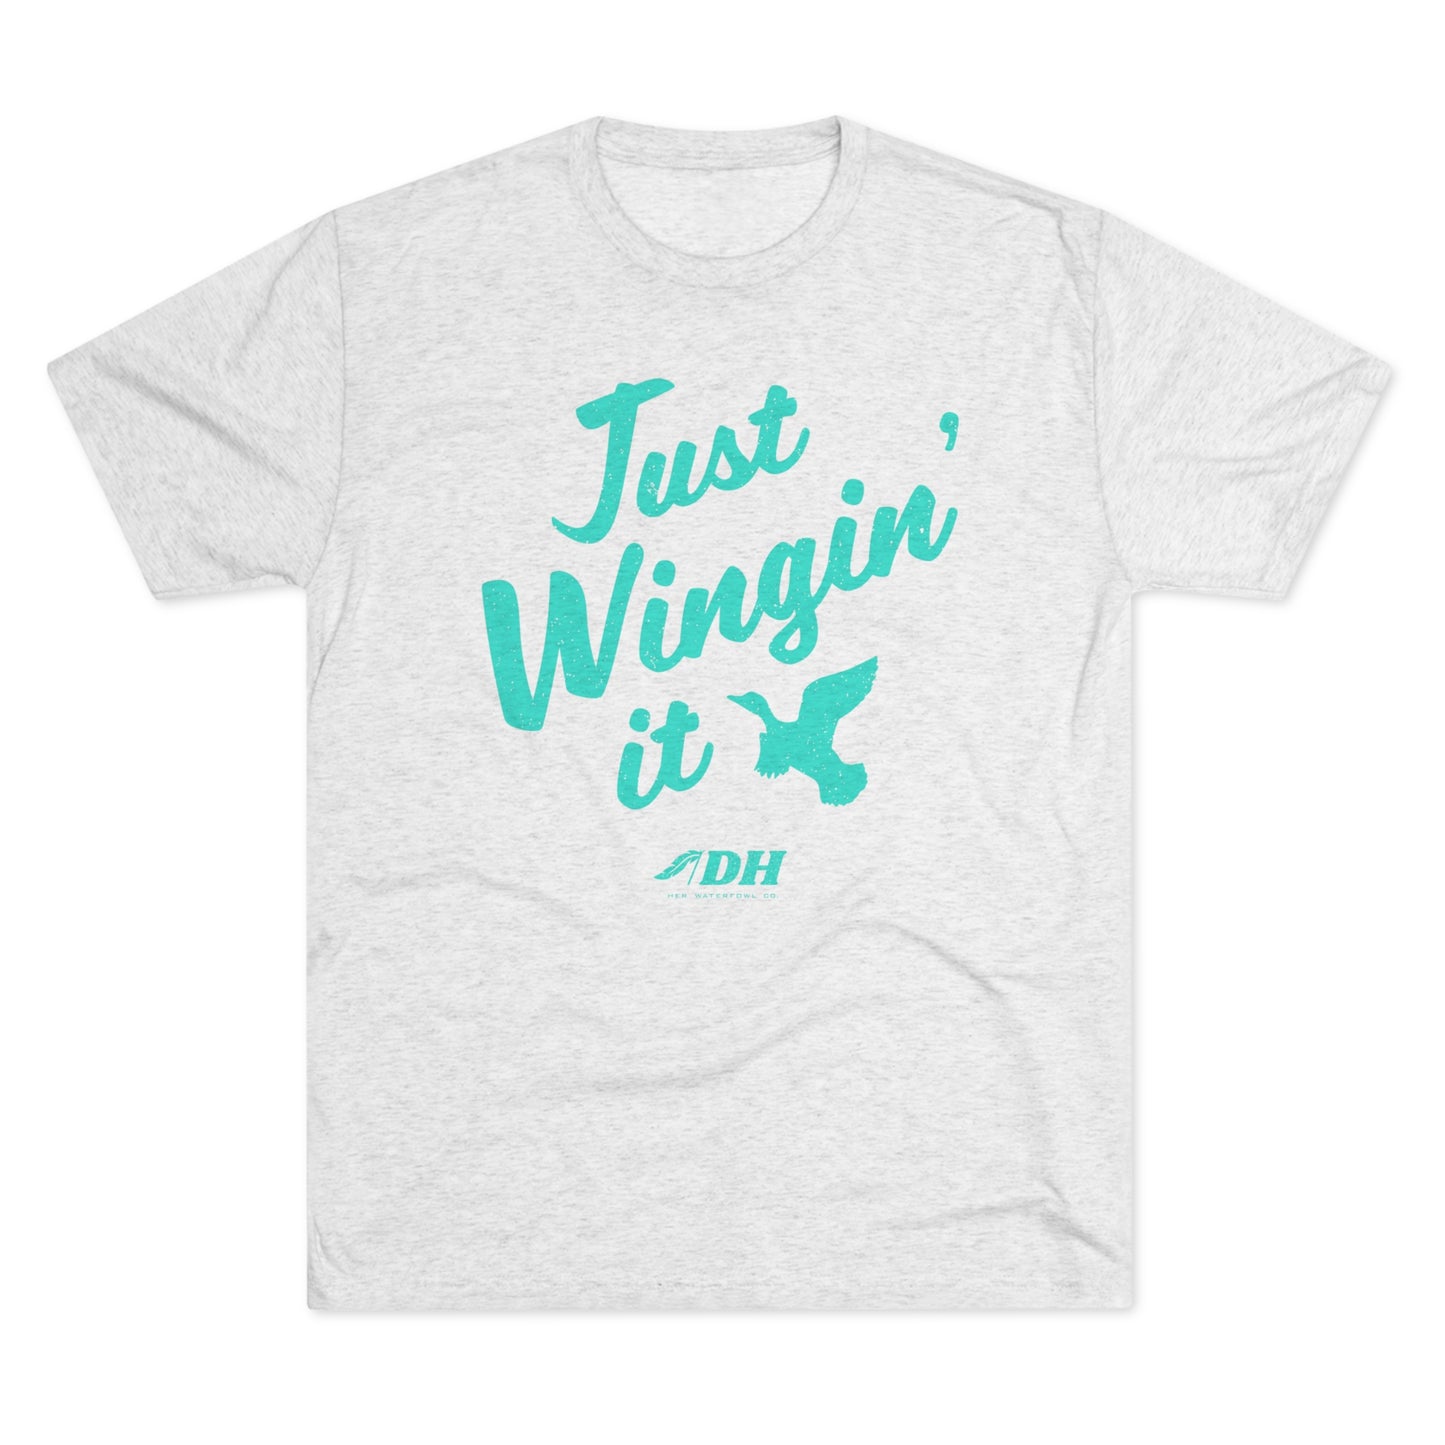 Just Wingin' It Tee (Turquoise Versions)